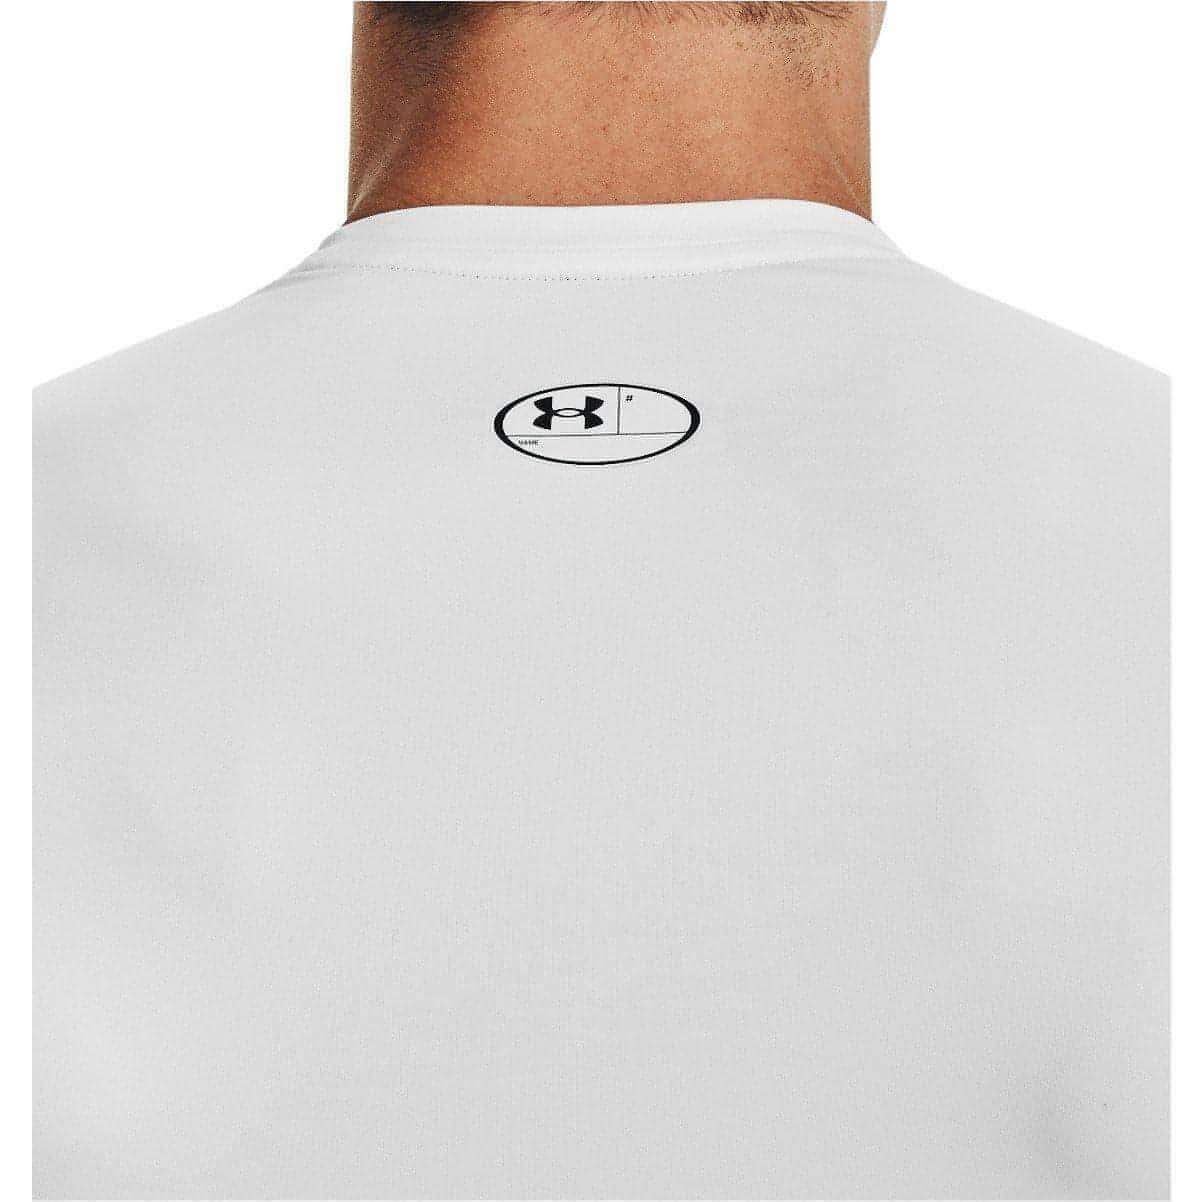 Under Armour Men's UA HeatGear Armour Long Sleeve Compression Shirt XL  White : Clothing, Shoes & Jewelry 